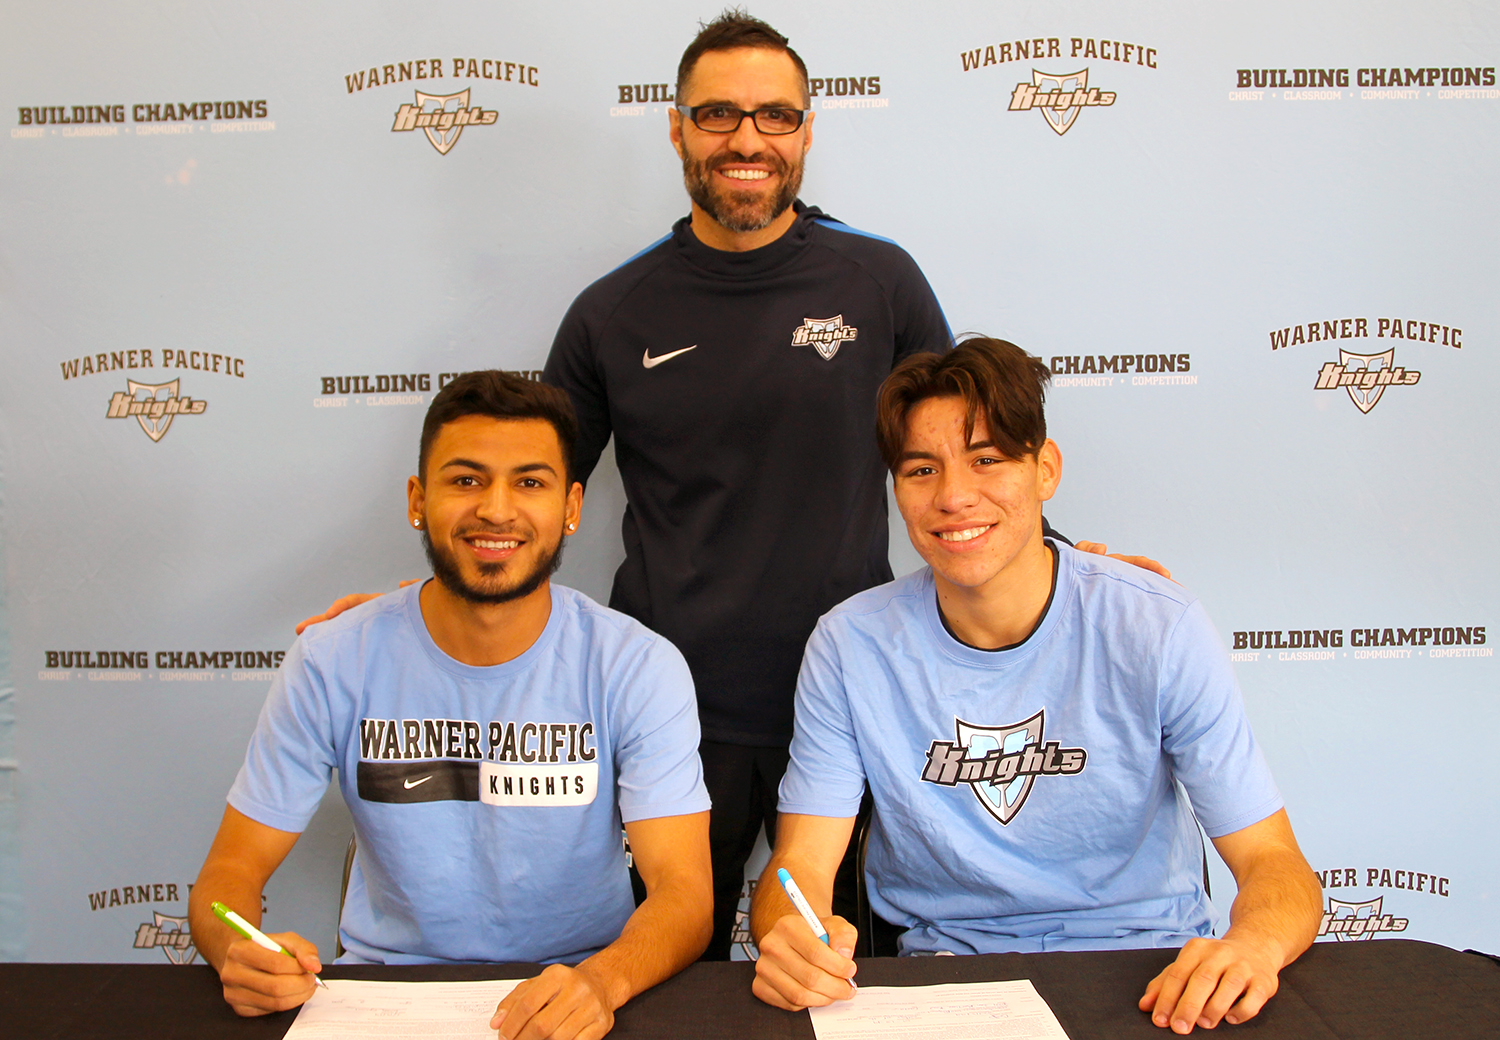 Former College of the Canyons men's soccer players Jorge Rojas, Cesar Dominguez and Jose Luis Ruiz (not pictured) have signed on with the men's soccer program at Warner Pacific University in Portland, Oregon. 
— Photo courtesy of WPU Athletics